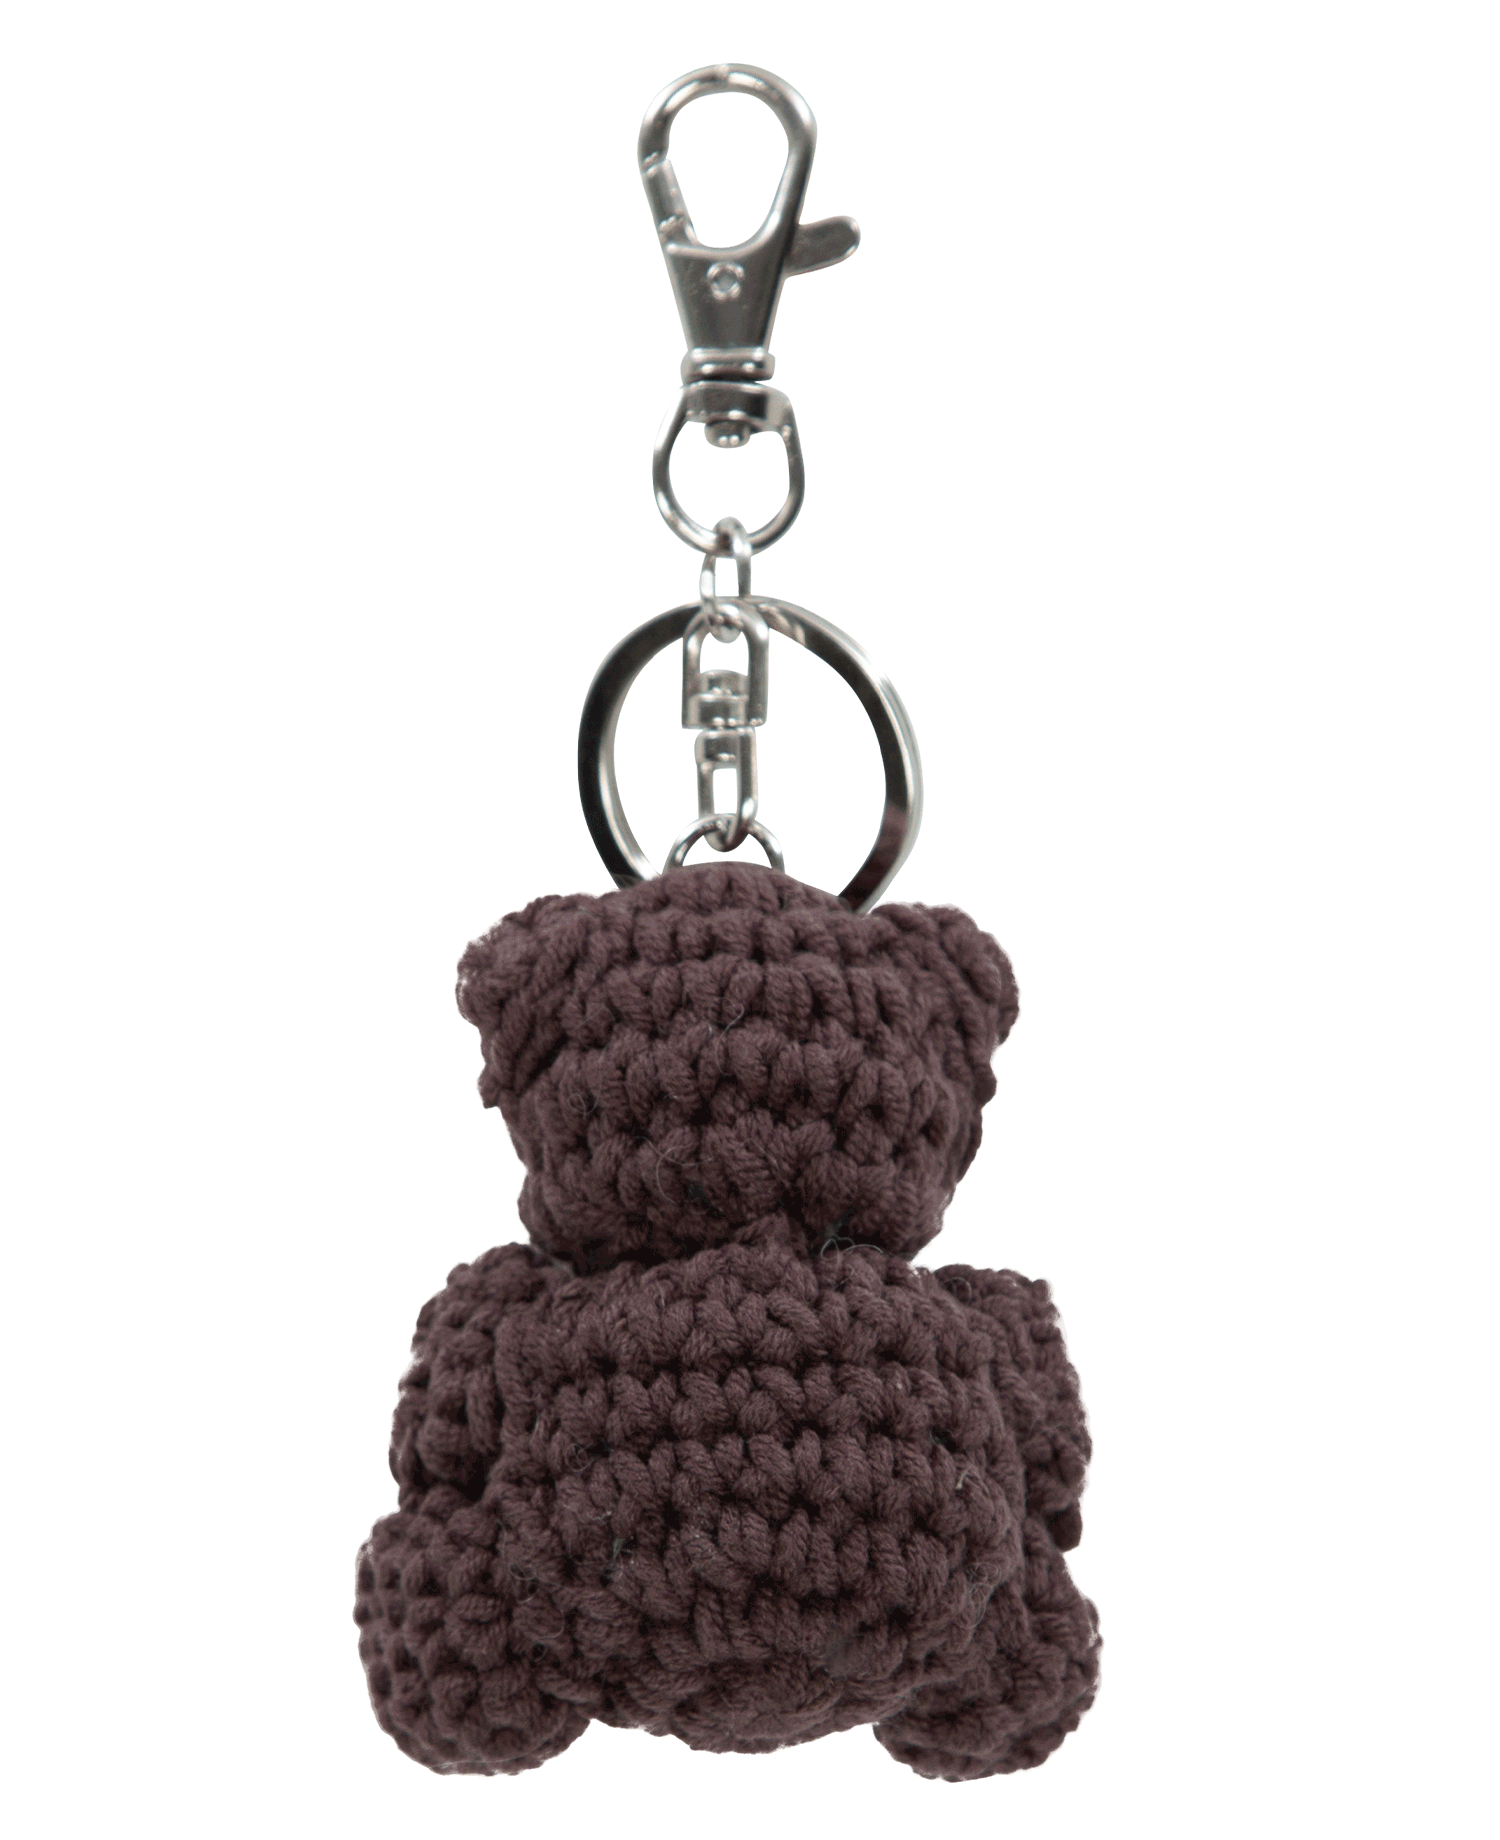 815 LIBERATION DAY KEY CHAIN_BROWN